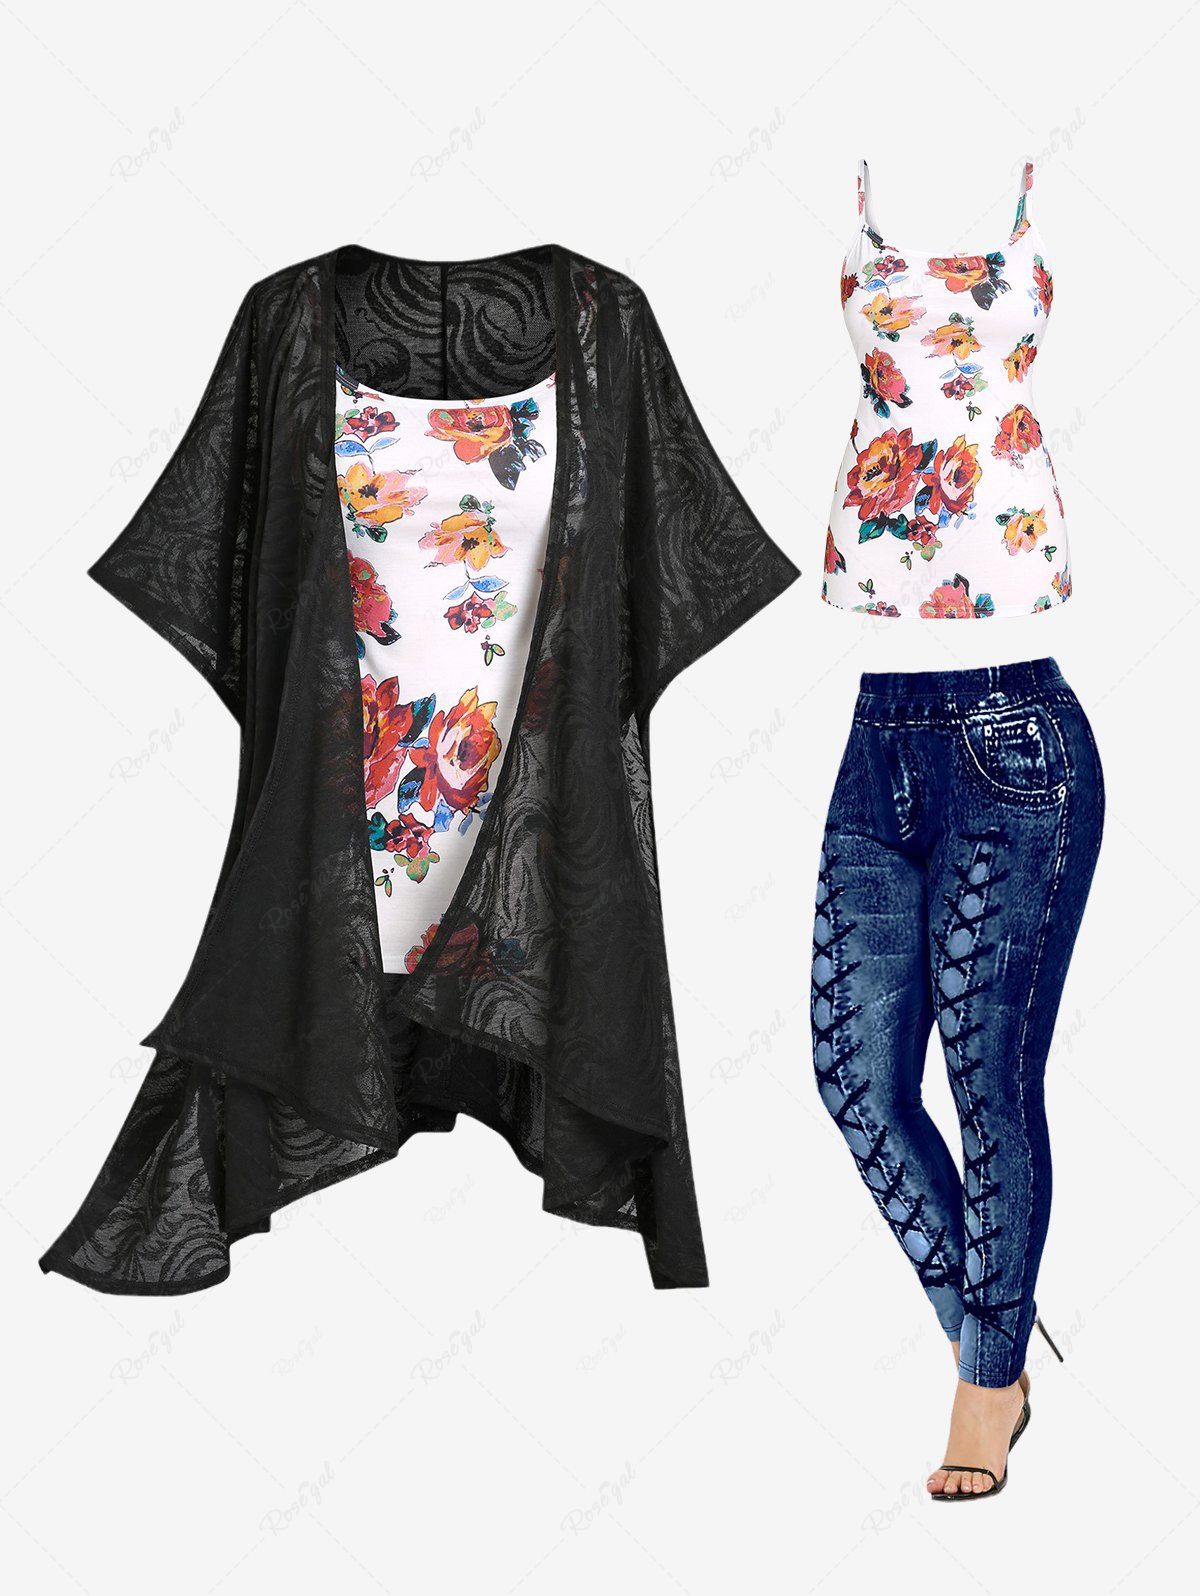 Buy Asymmetric Cardigan with Floral Camisole and 3D Print Leggings Plus Size Fall Outfit  